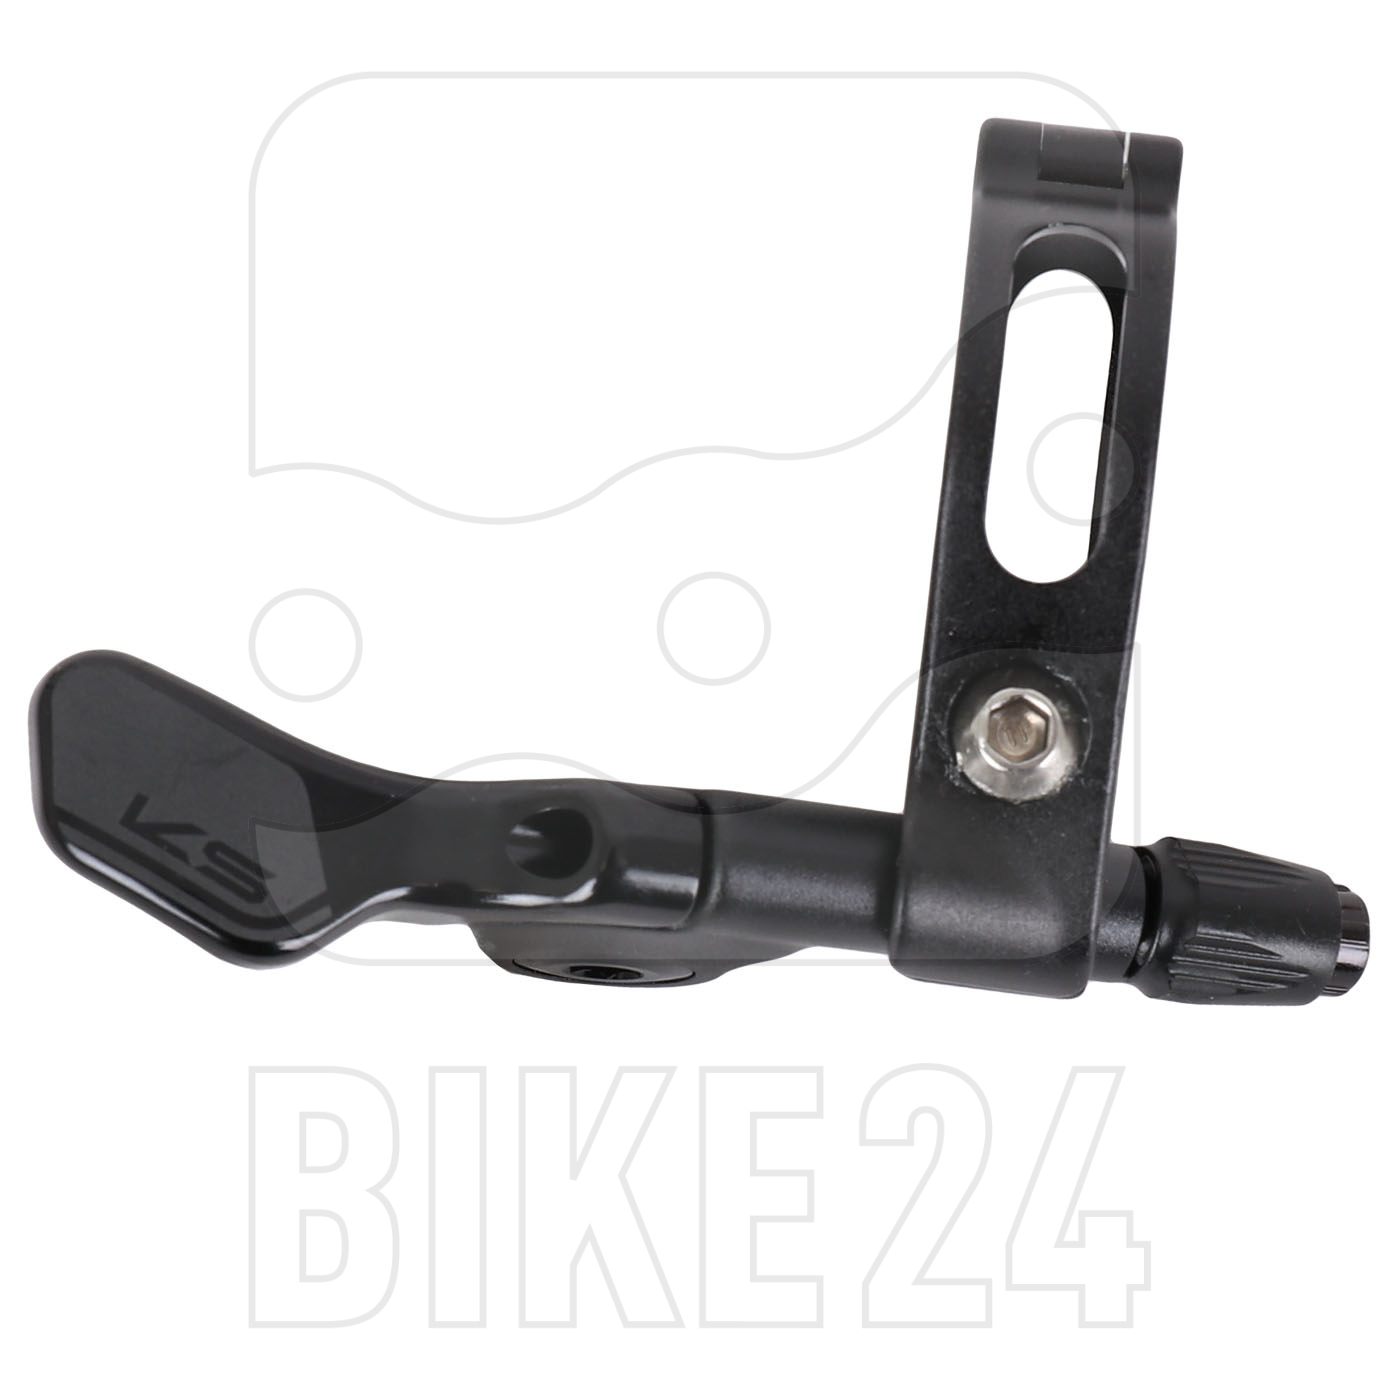 Productfoto van KS Southpaw Alloy Remote - Traditional - for 31.8mm bar clamp